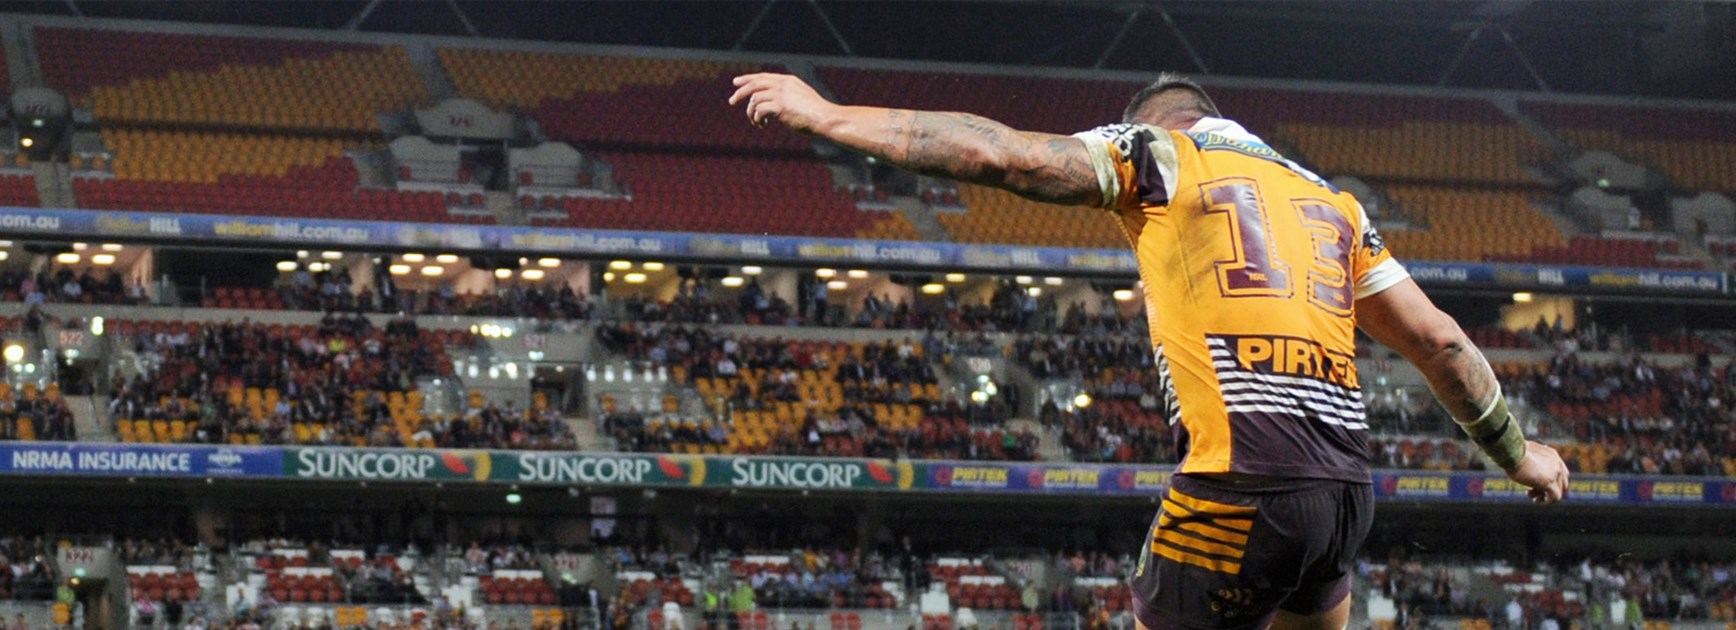 Goal-kicking lock Corey Parker is set to eclipse Darren Lockyer's point-scoring record for the Broncos.